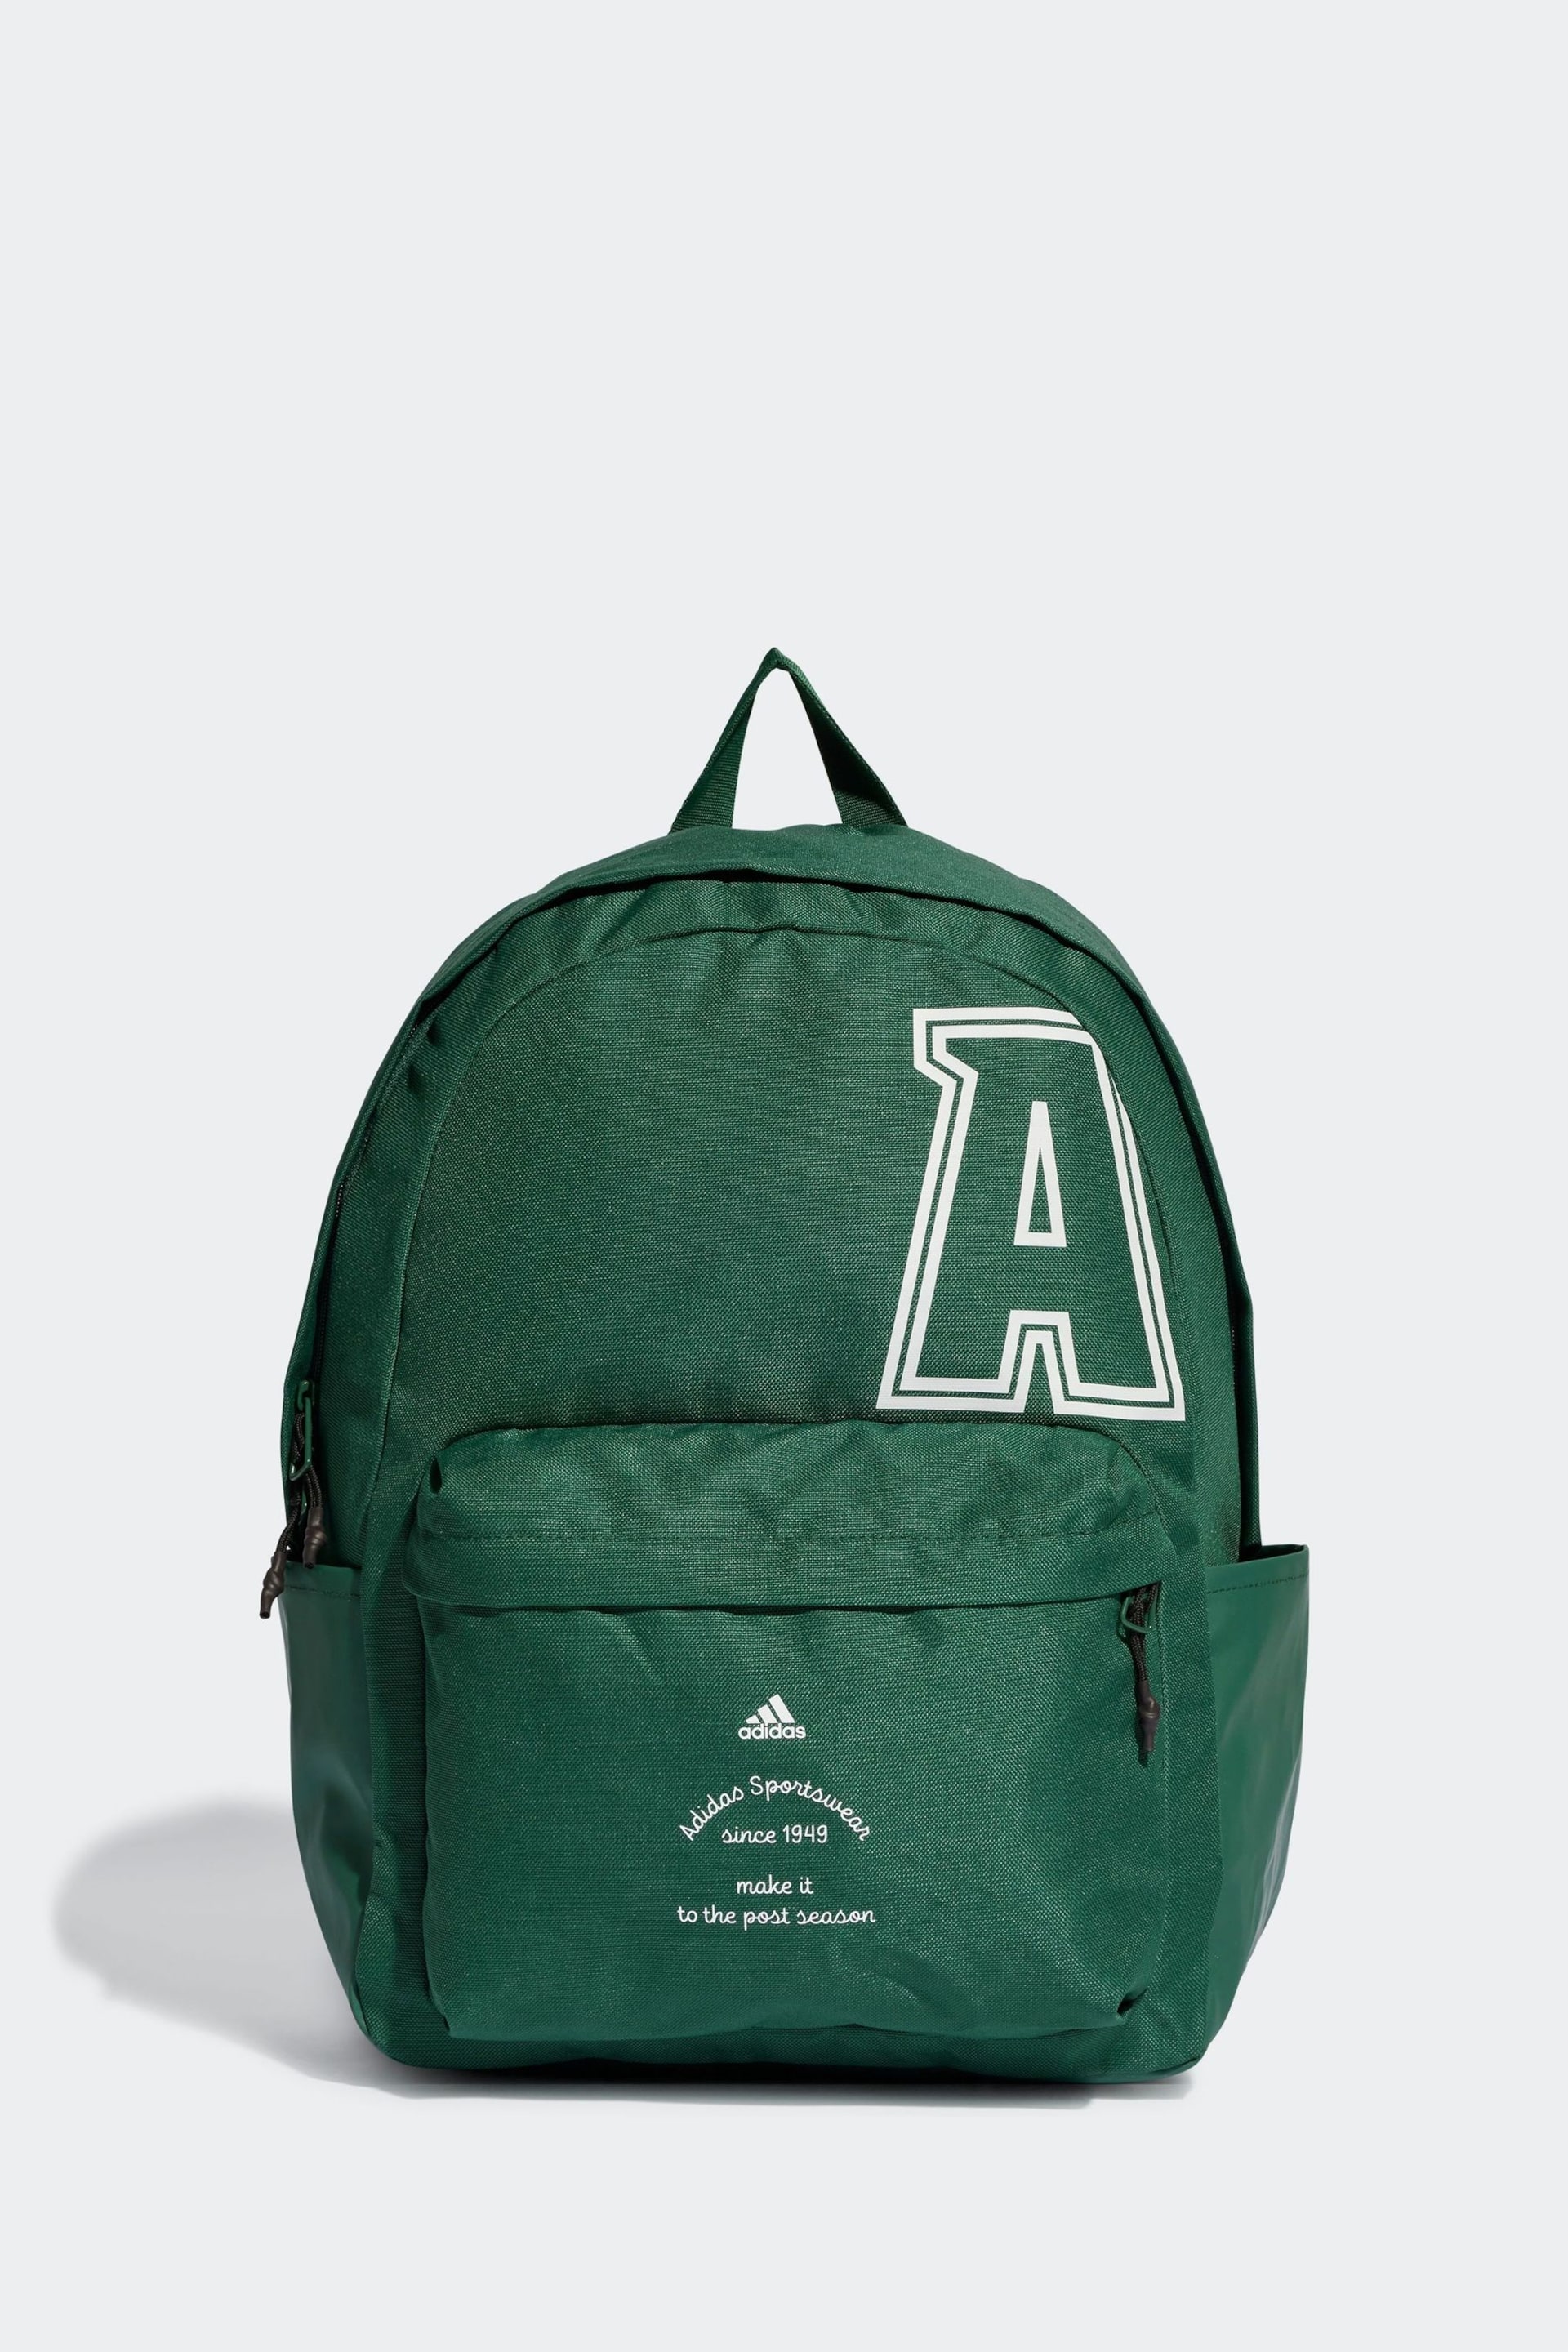 adidas Green Adult Classic Brand Love Initial Print Backpack - Image 1 of 6